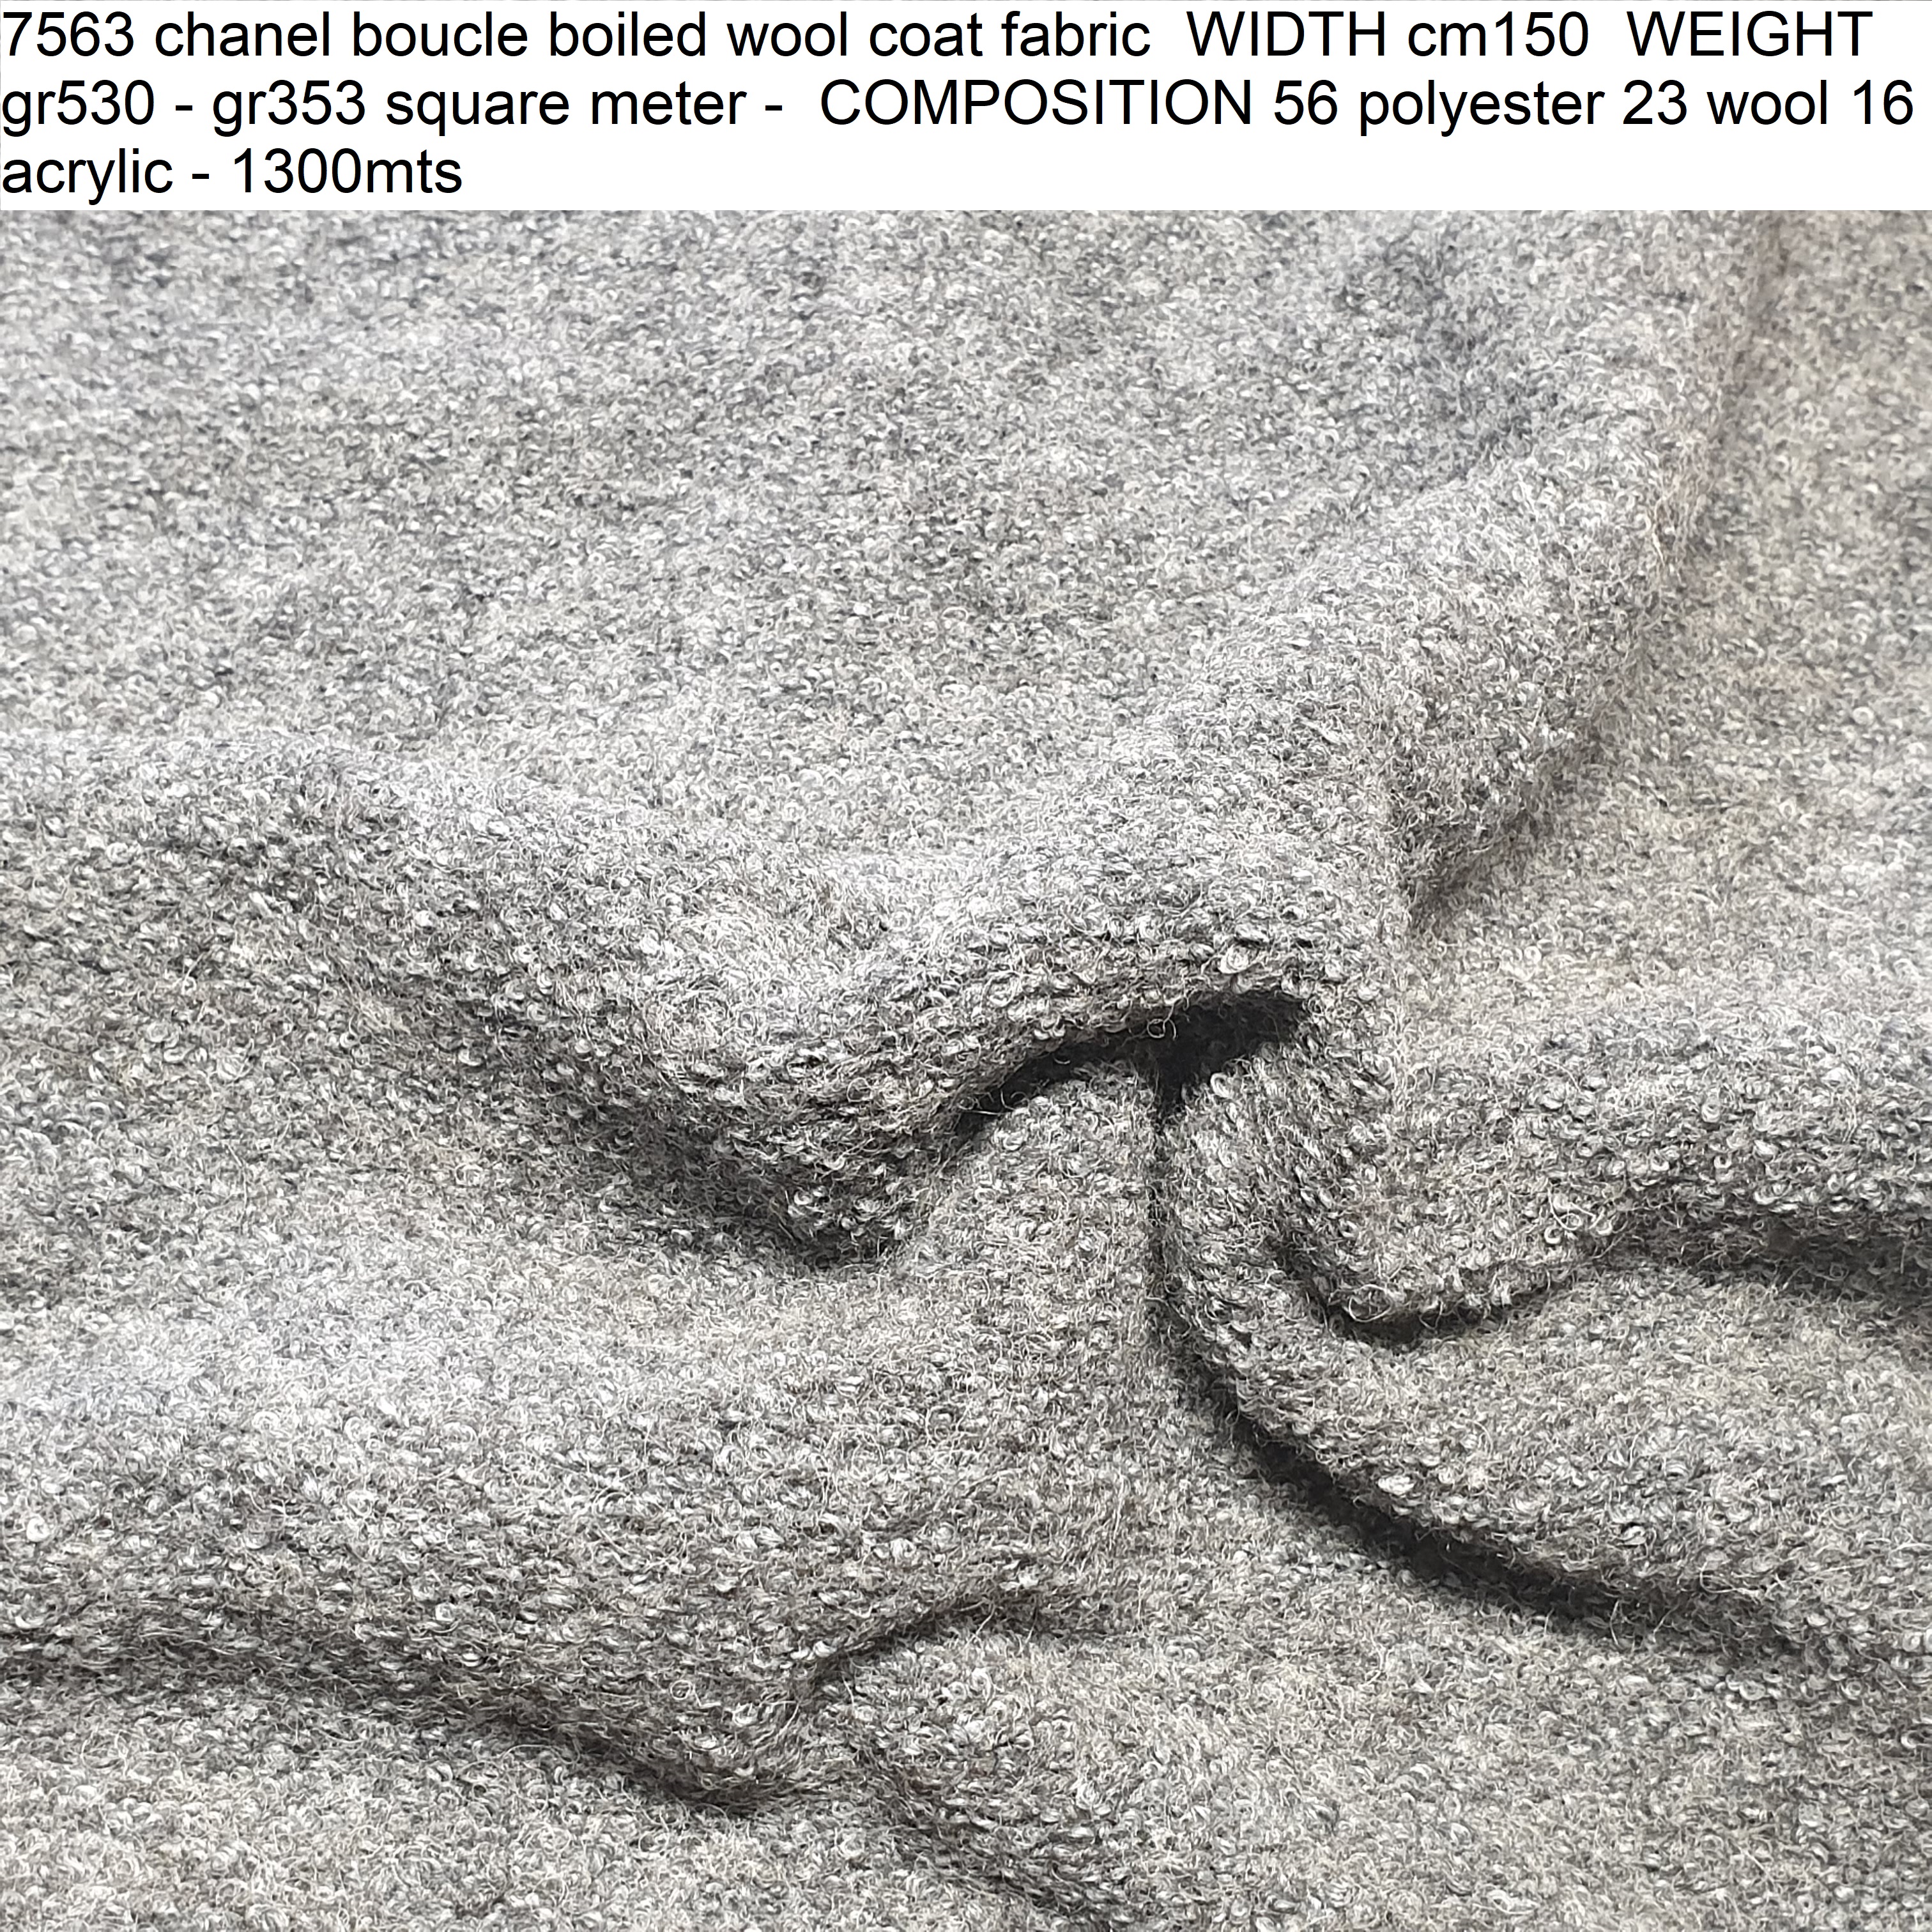 7563 chanel boucle boiled wool coat fabric WIDTH cm150 WEIGHT gr530 - gr353 square meter - COMPOSITION 56 polyester 23 wool 16 acrylic - 1300mts